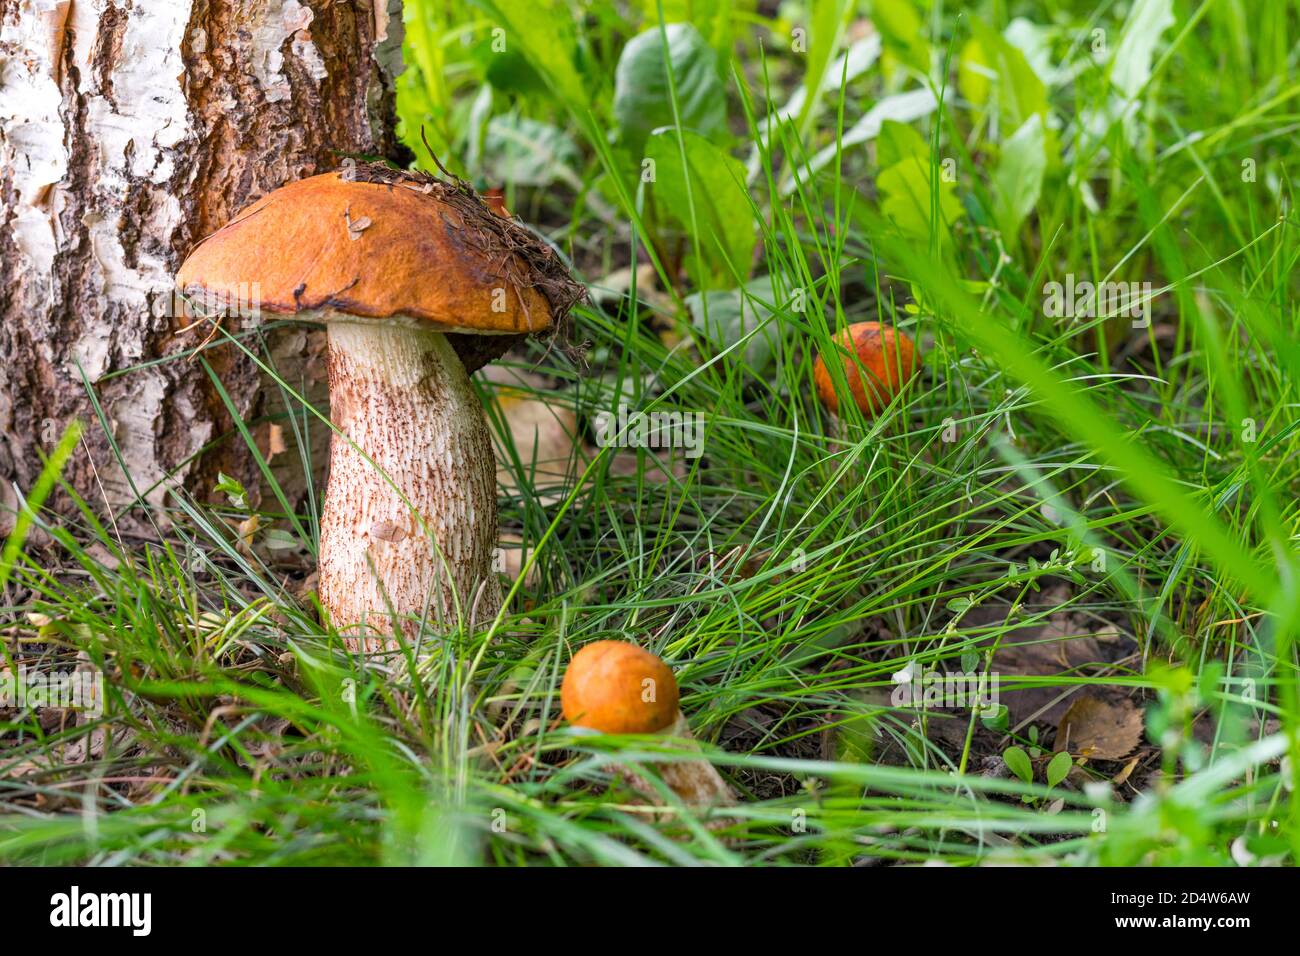 Red-capped scaber stalk in forest. Leccinum aurantiacum. Close-up, shallow  DOF. Three red-headed mushrooms grow near the birch tree Stock Photo - Alamy